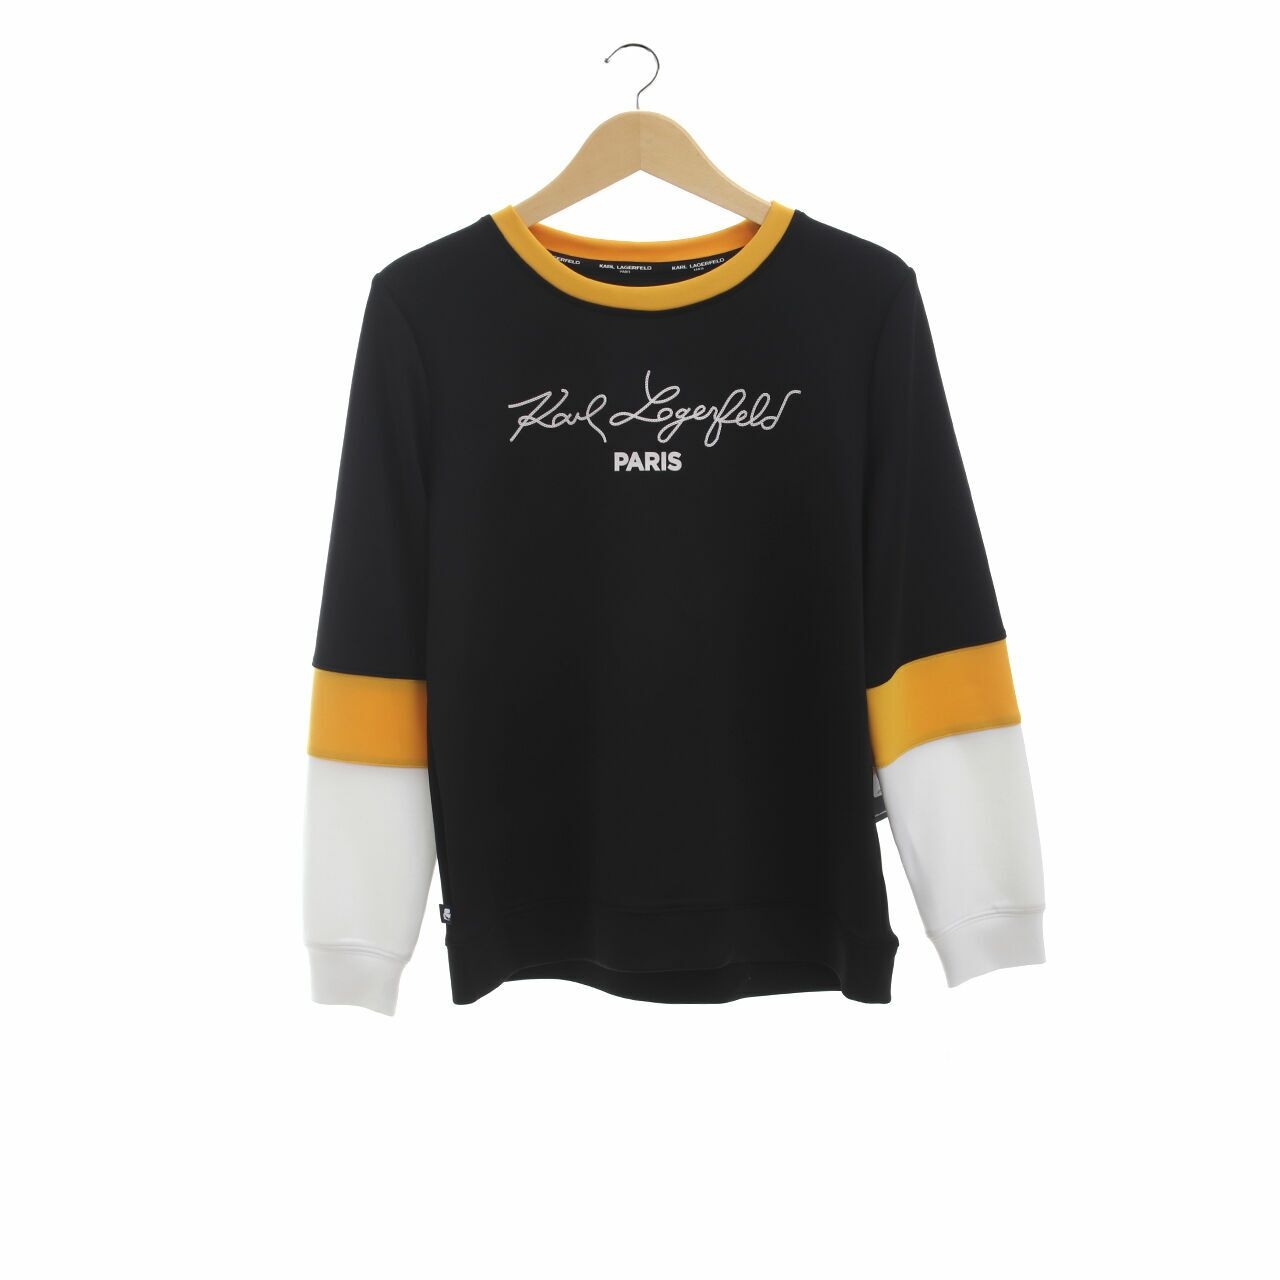 Karl Lagerfeld Casual Long Sleeve Colorblock List Yellow T-Shirt